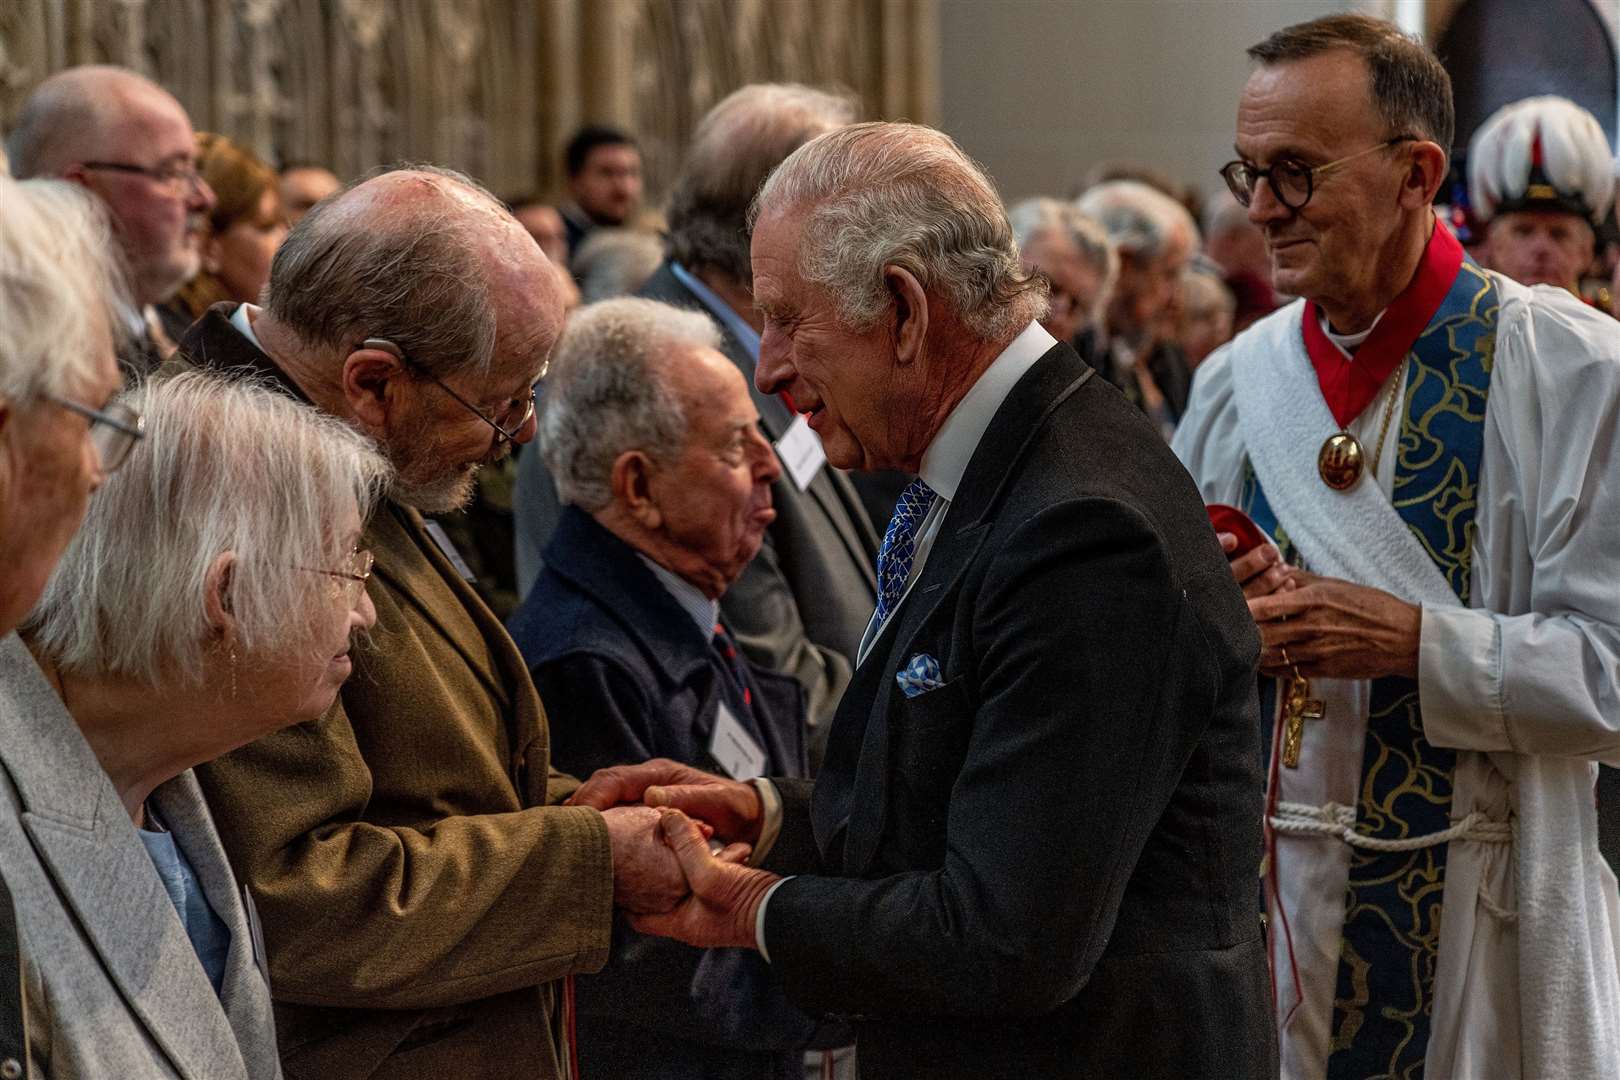 The King handing out Maundy money during the Royal Maundy Service at York Minster last year (Charlotte Graham/Daily Telegraph/PA)